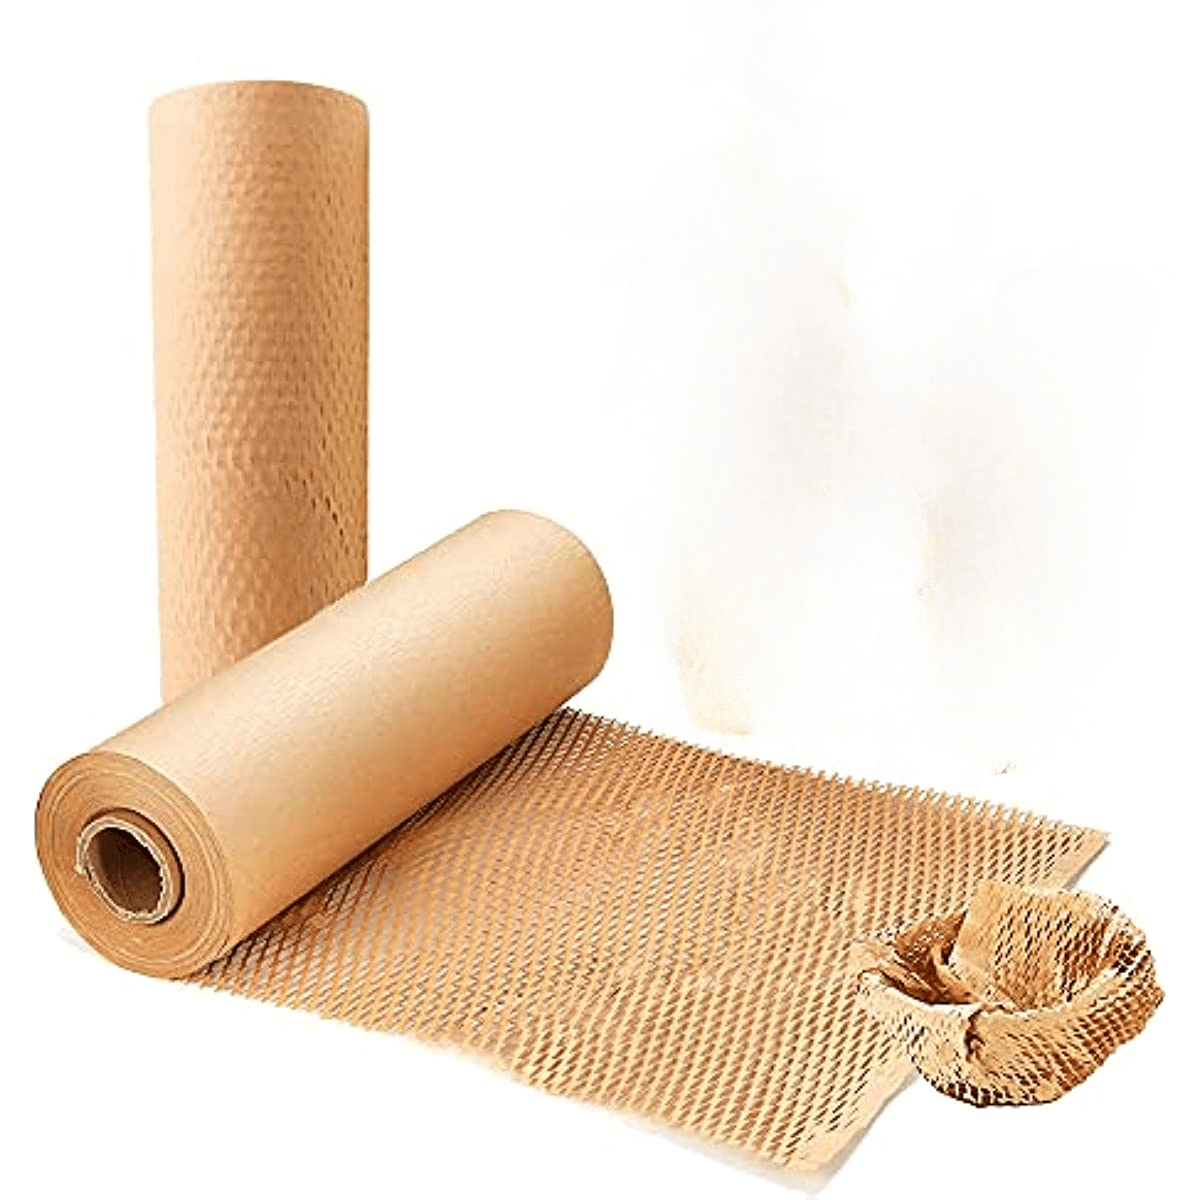  Fortuneknock Honeycomb Packing Paper 1 Roll 12 Inch X 164 Feet  Packing Wrap, Air Cushions Packing，Shipping Wrap Roll, Biodegradable  Packing Materials For Moving Household, Gift Packing Paper Roll. : Office  Products